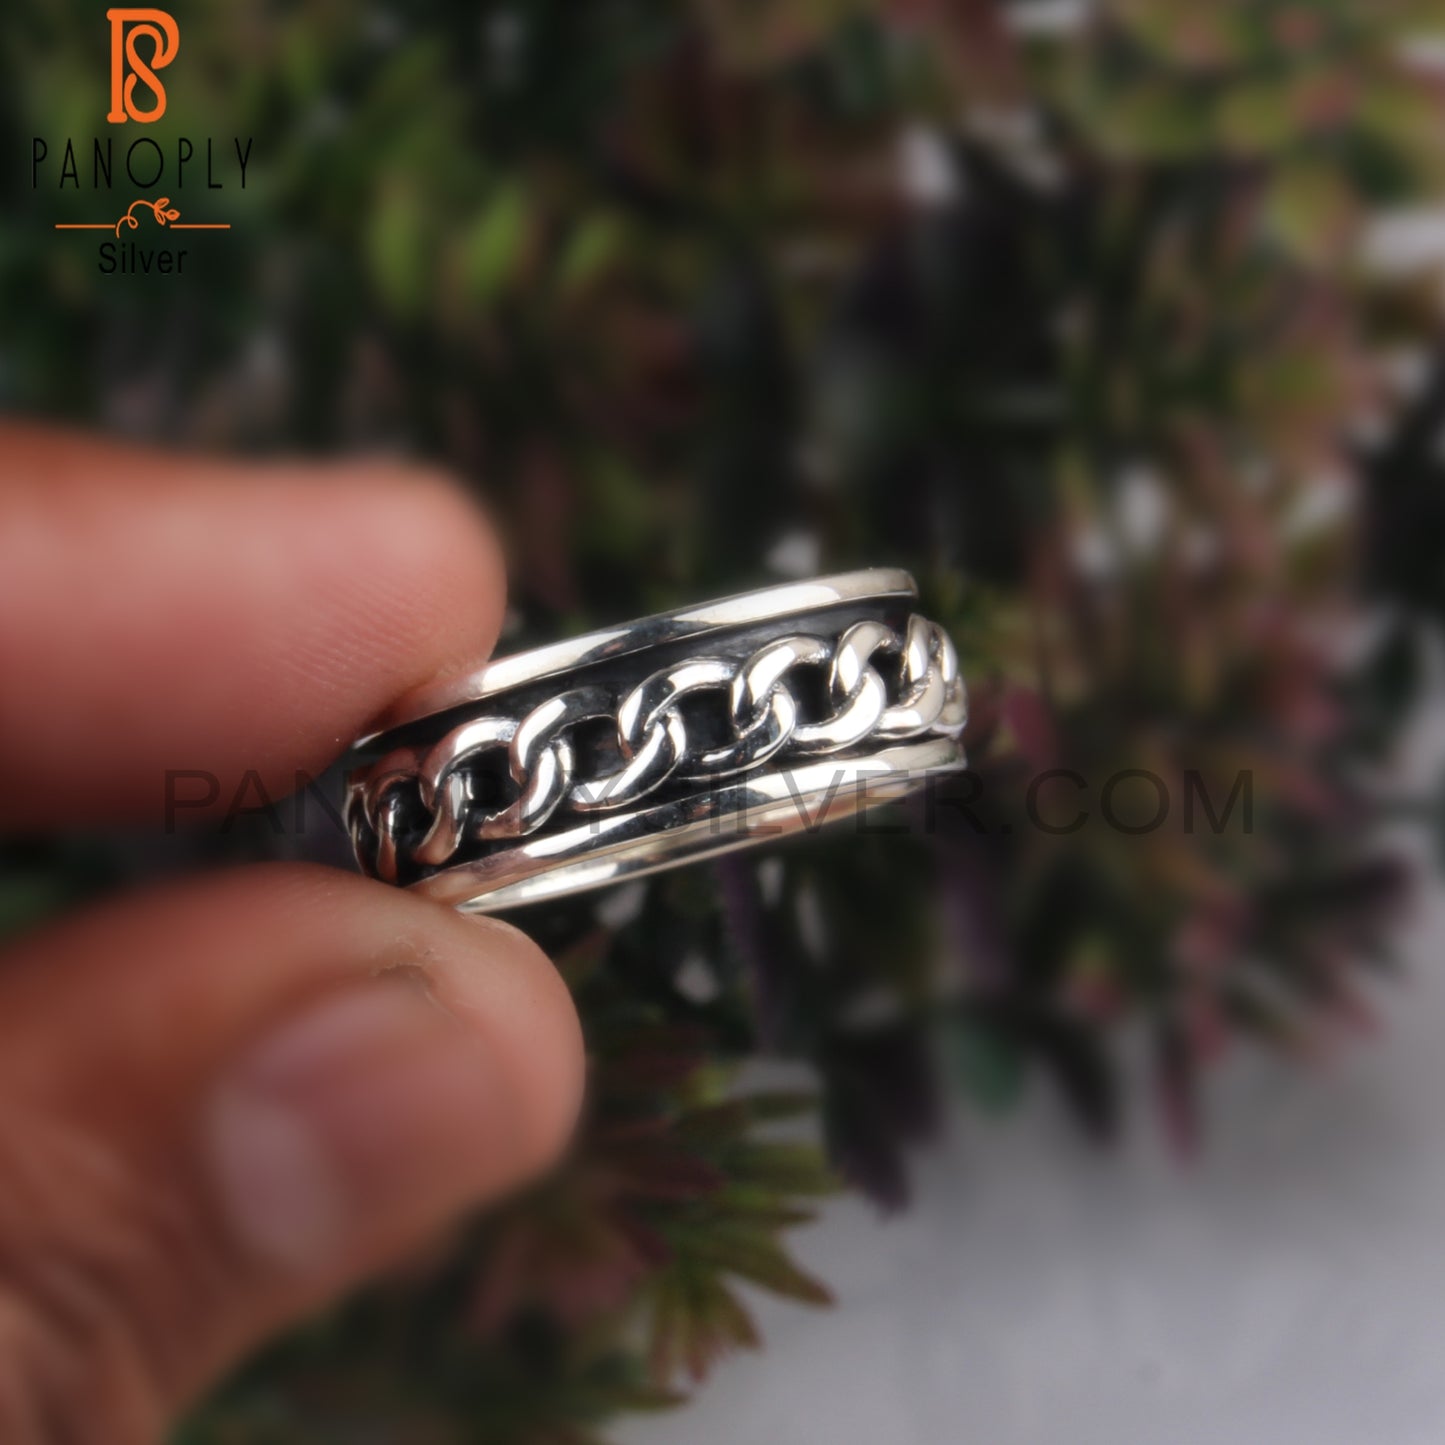 Handmade 925 Sterling Silver Chain Link Ring Band